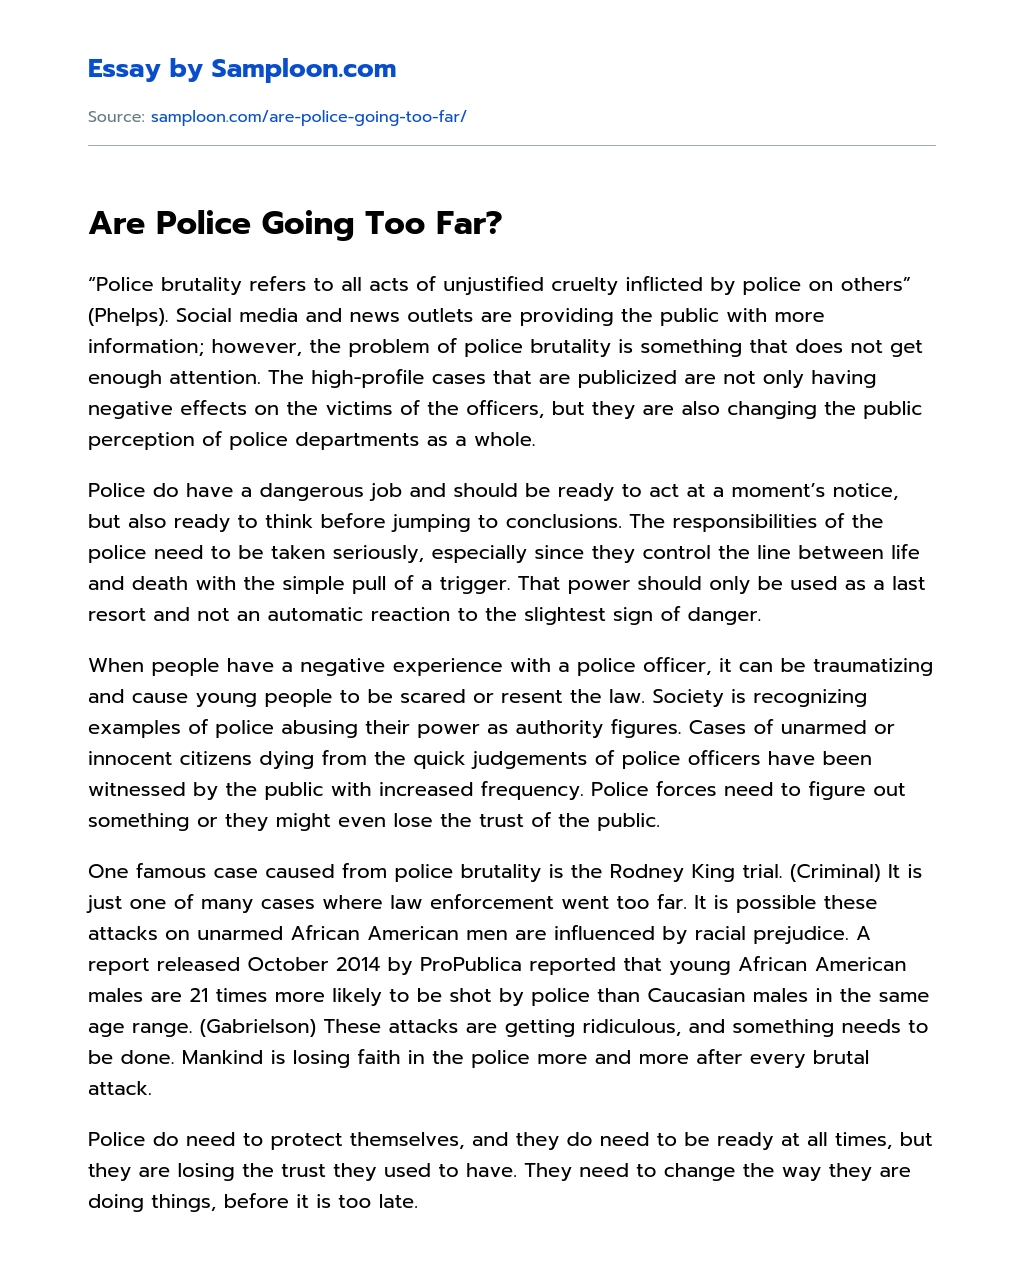 Are Police Going Too Far? essay